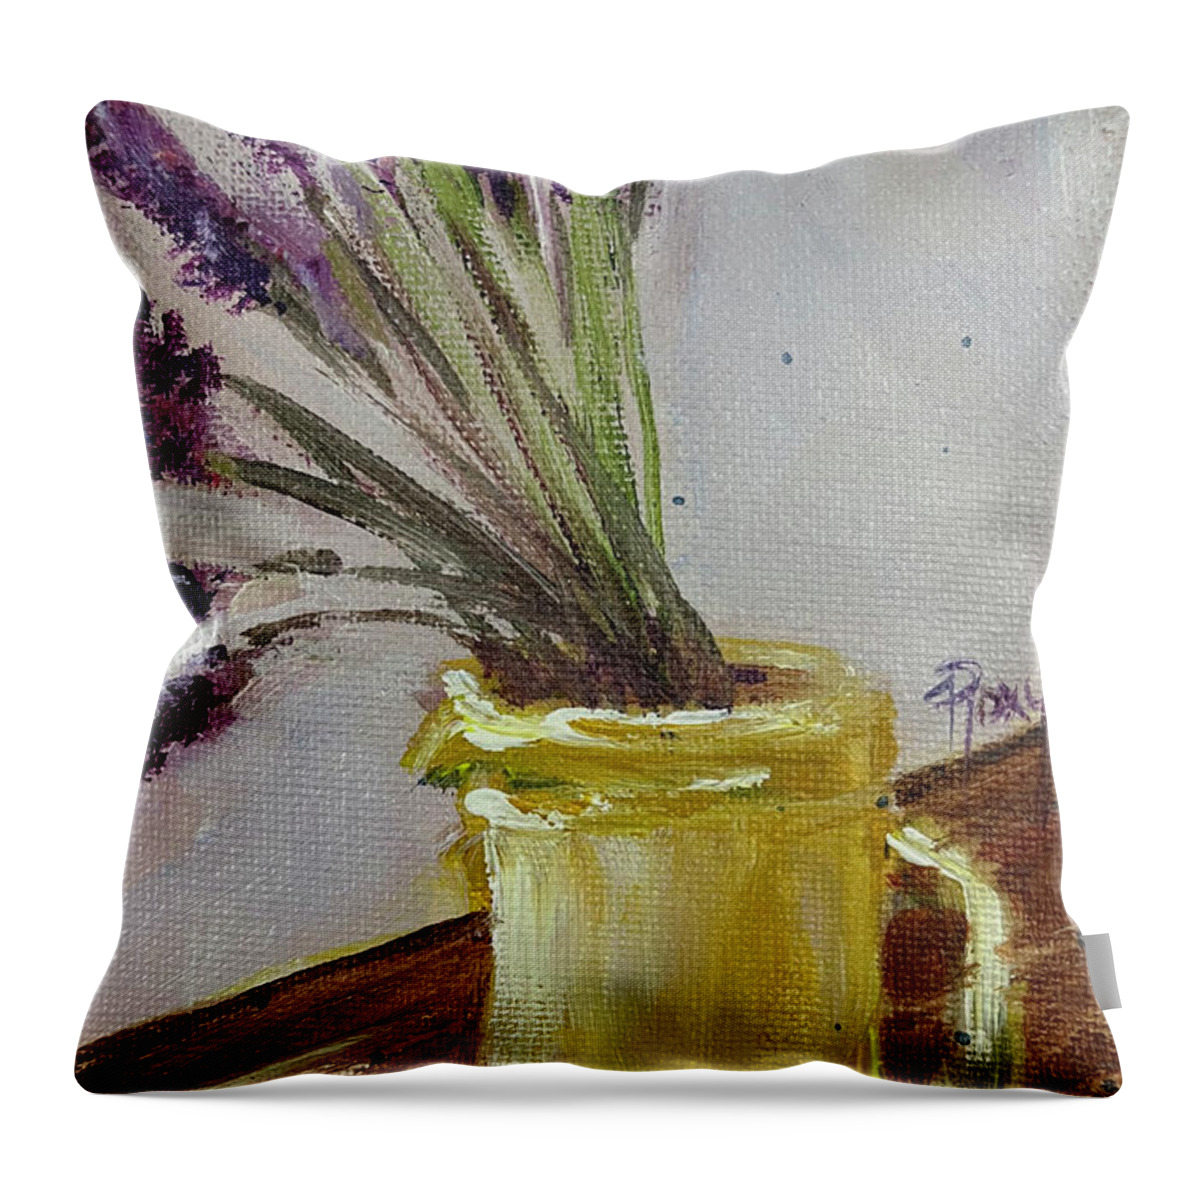 Lavender Throw Pillow featuring the painting Lavender in a Yellow Pitcher by Roxy Rich